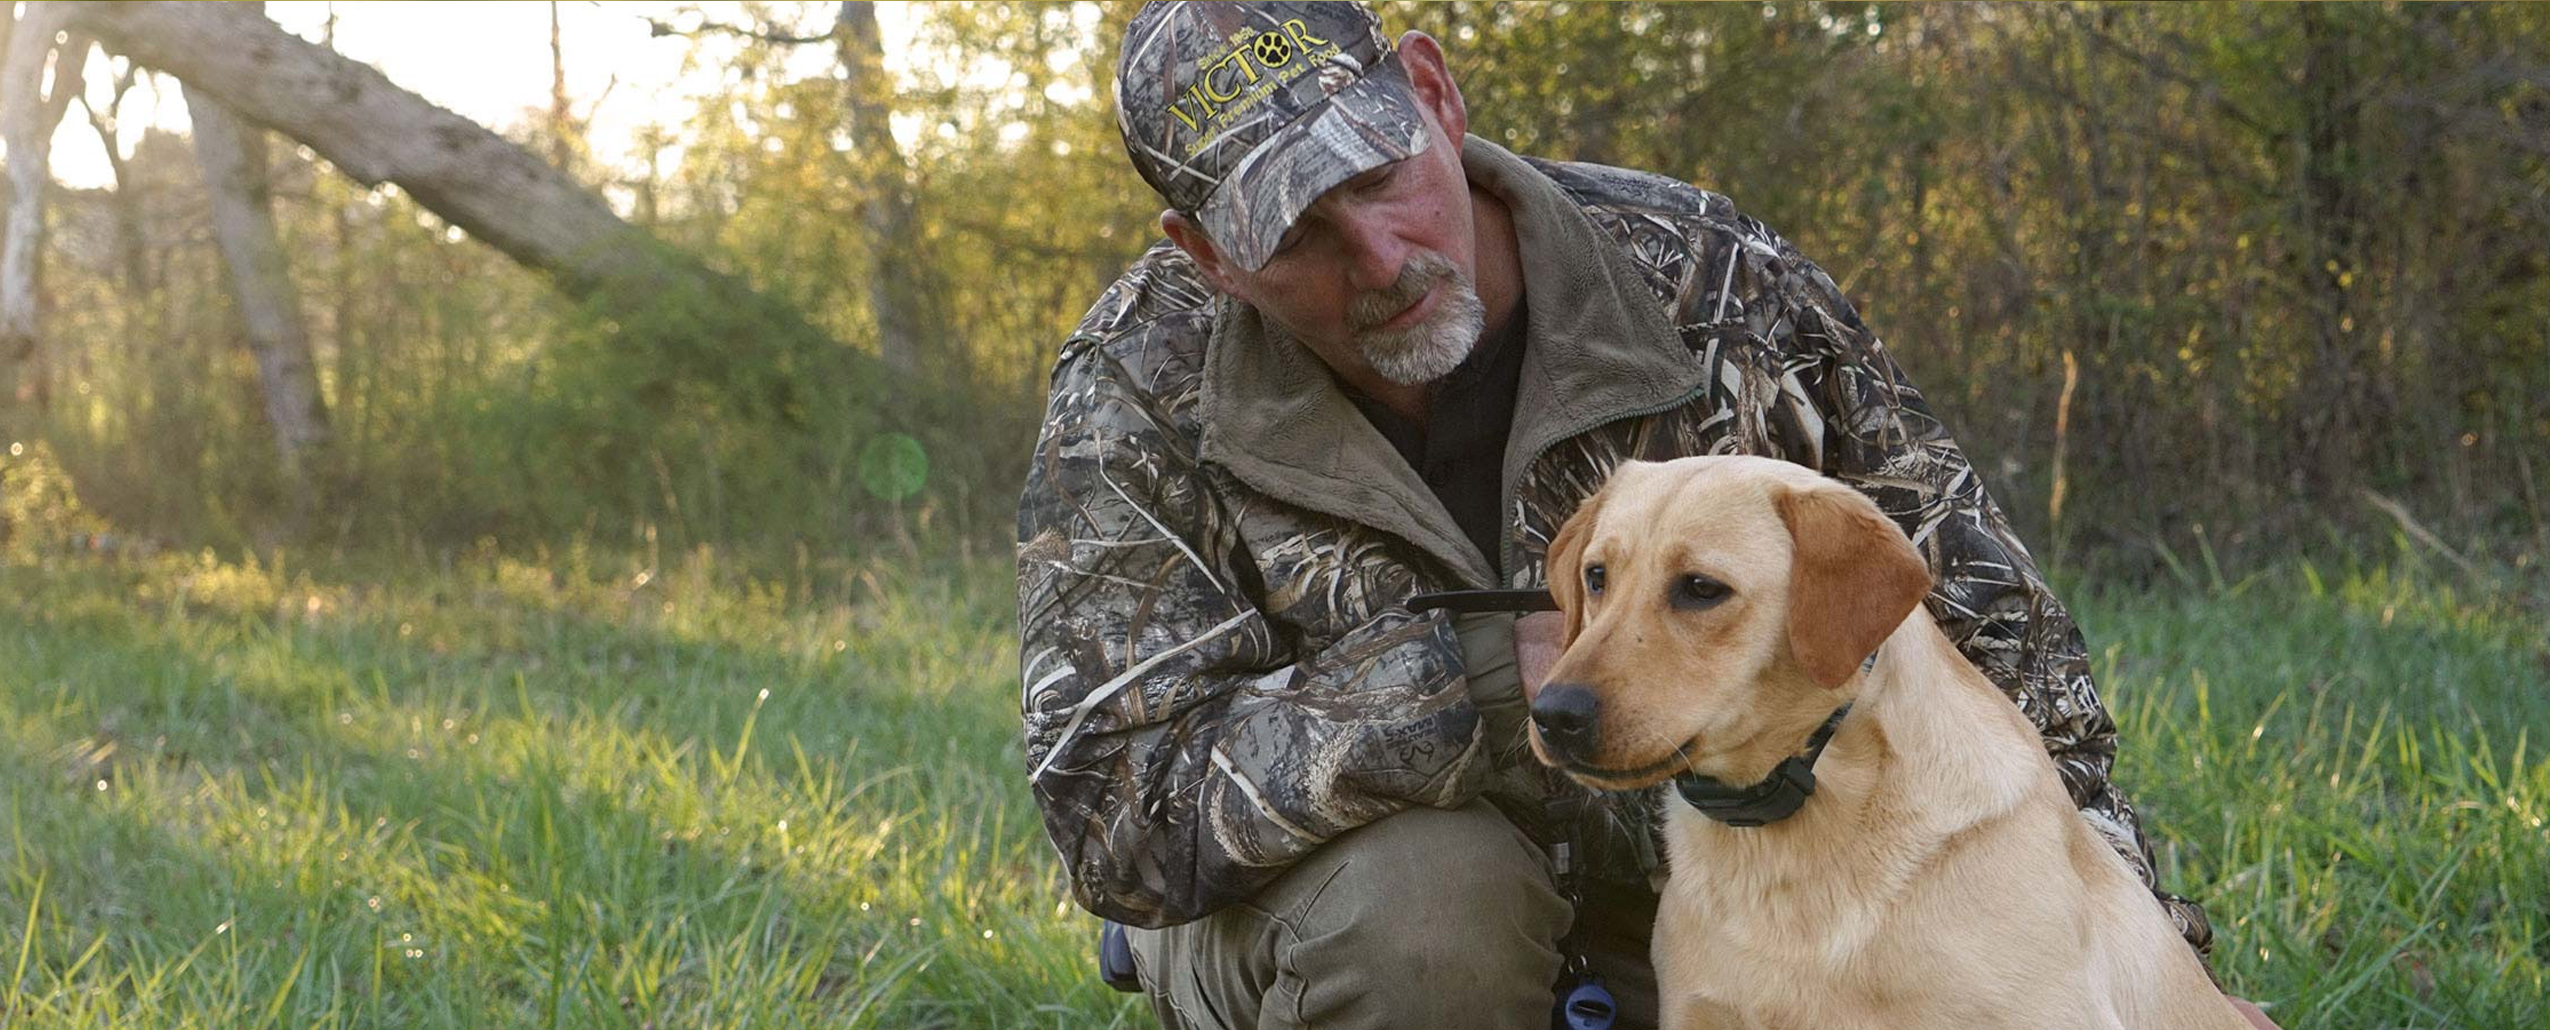 Dog trainer Shawn Sims with yellow labrador retriever dog in field